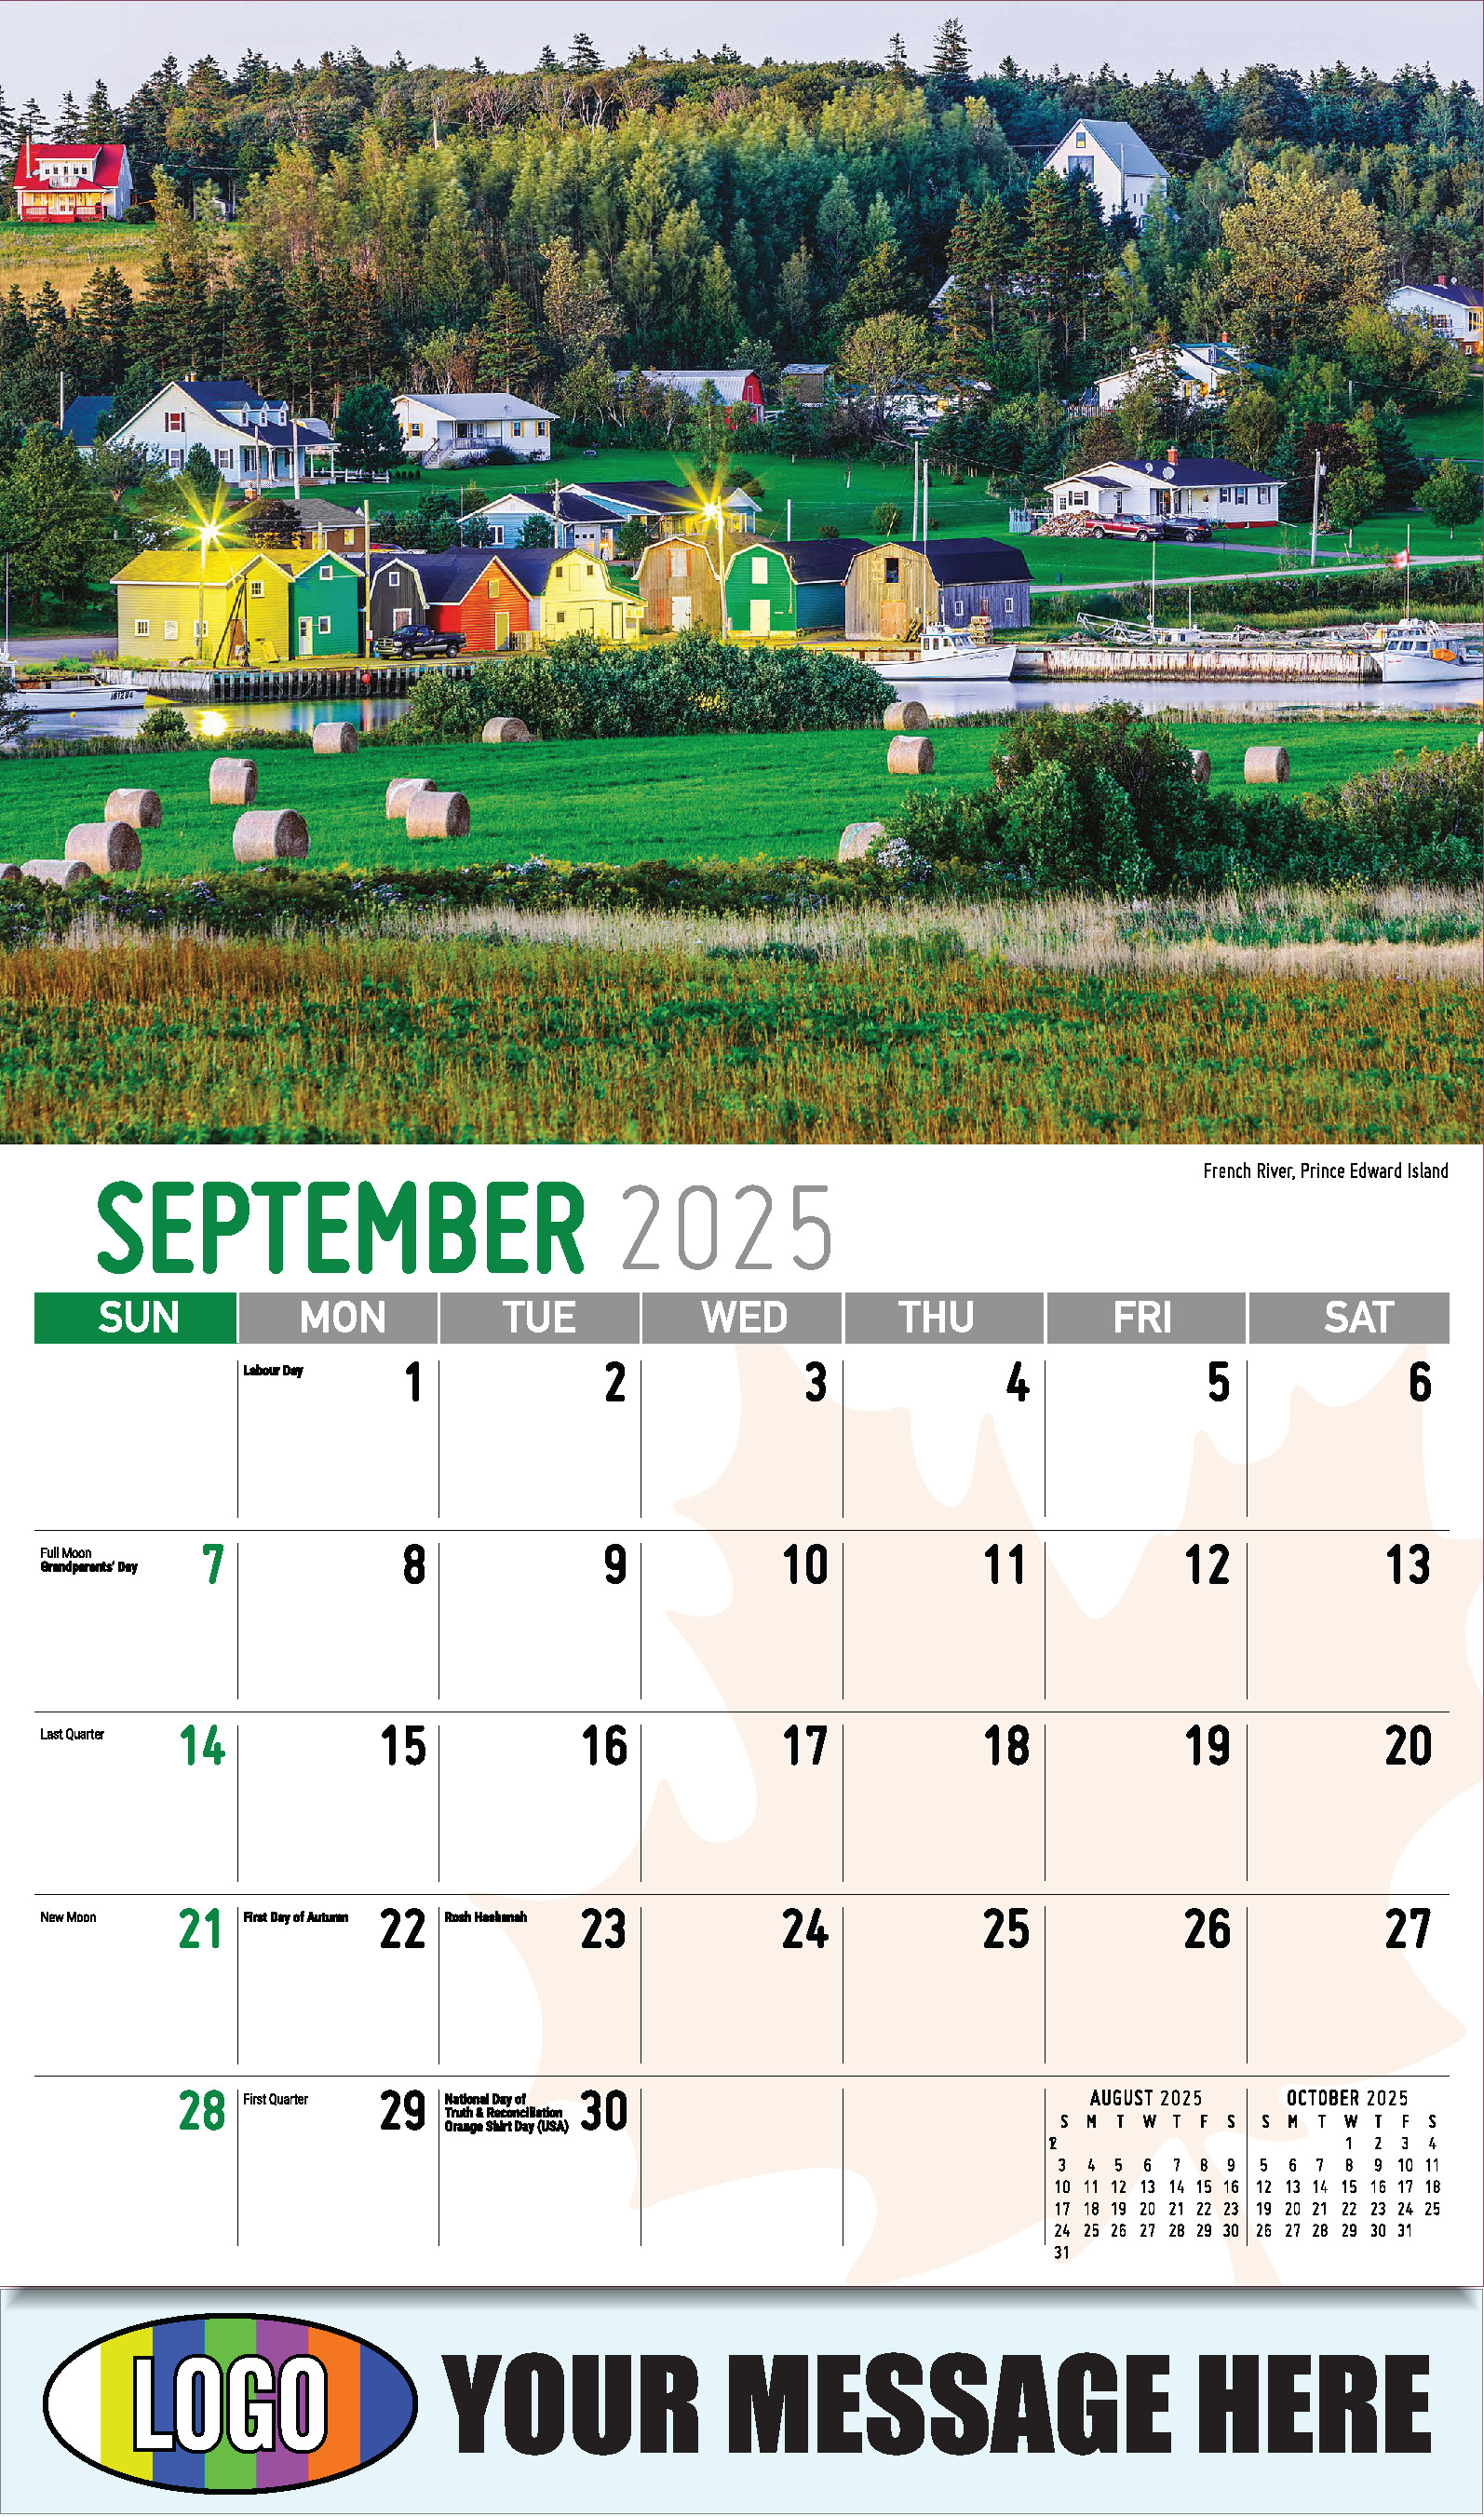 Scenes of Canada 2025 Business Promotion Wall Calendar - September